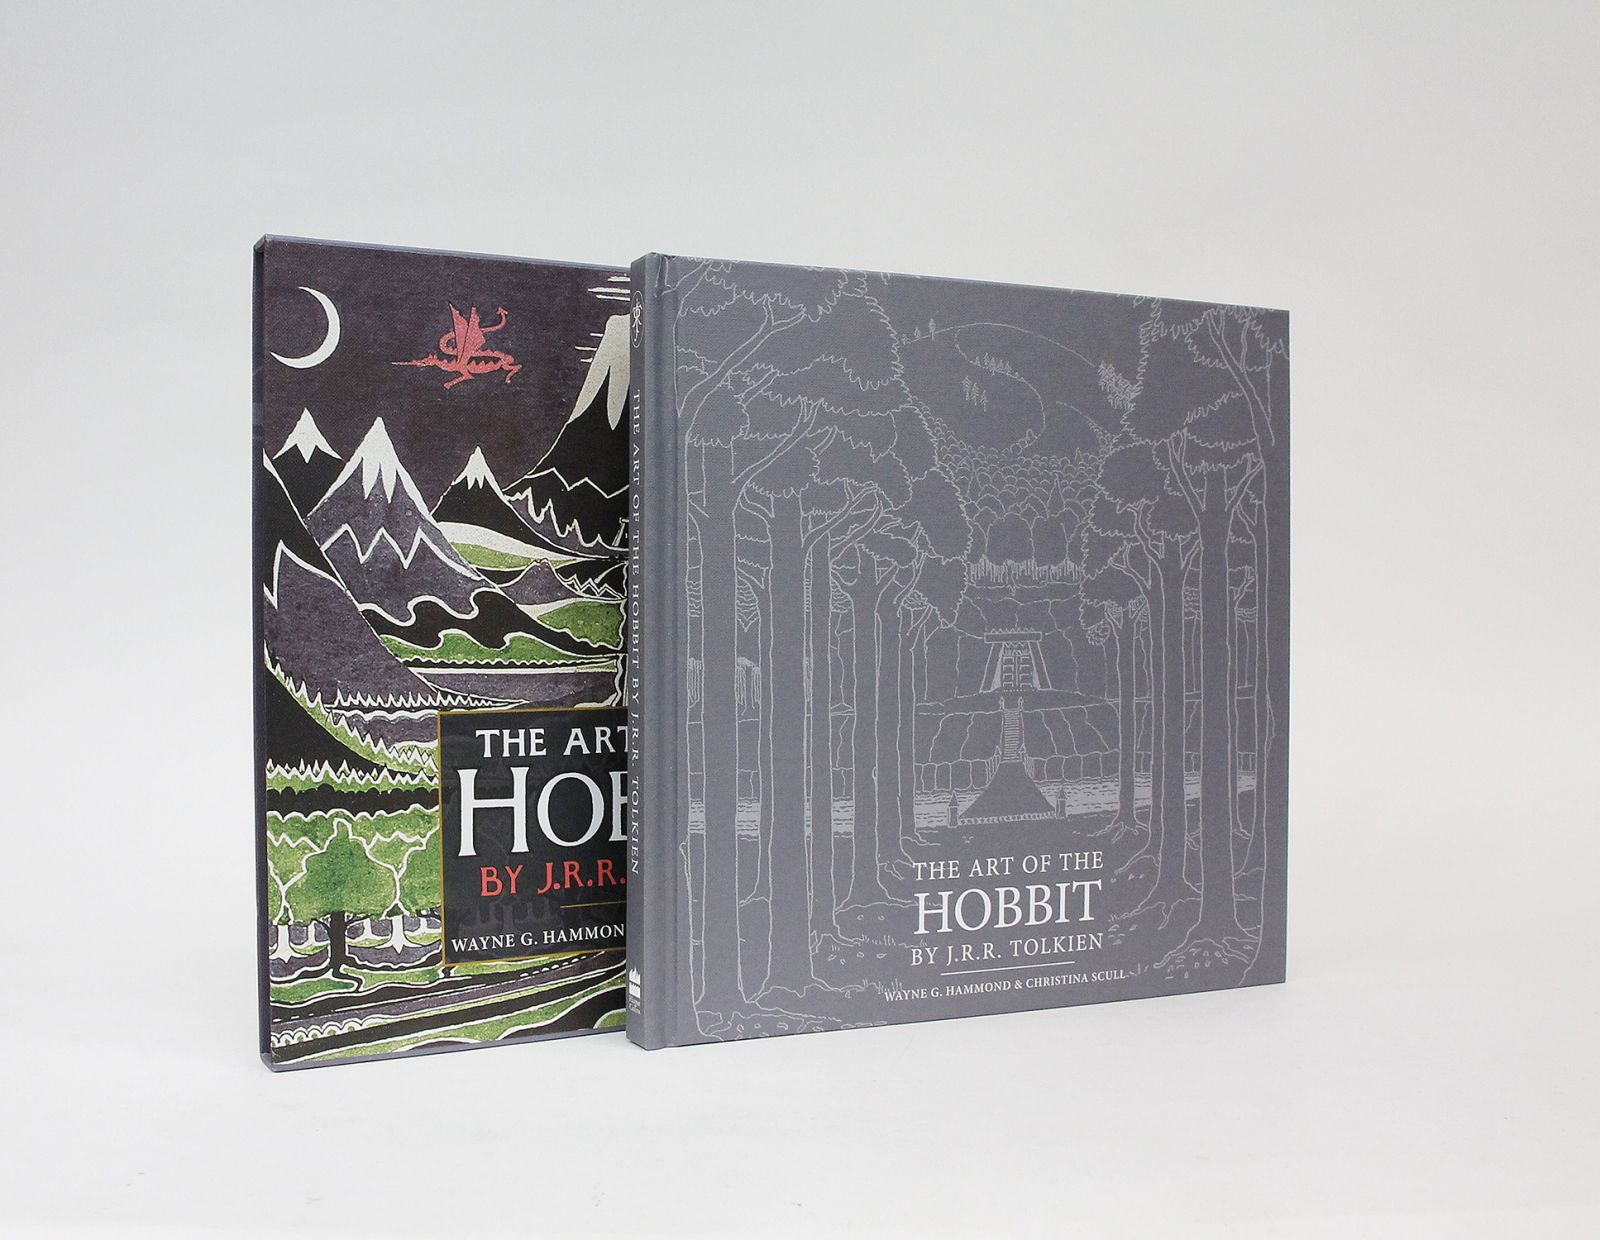 THE ART OF THE HOBBIT BY J. R. R. TOLKIEN -  image 2